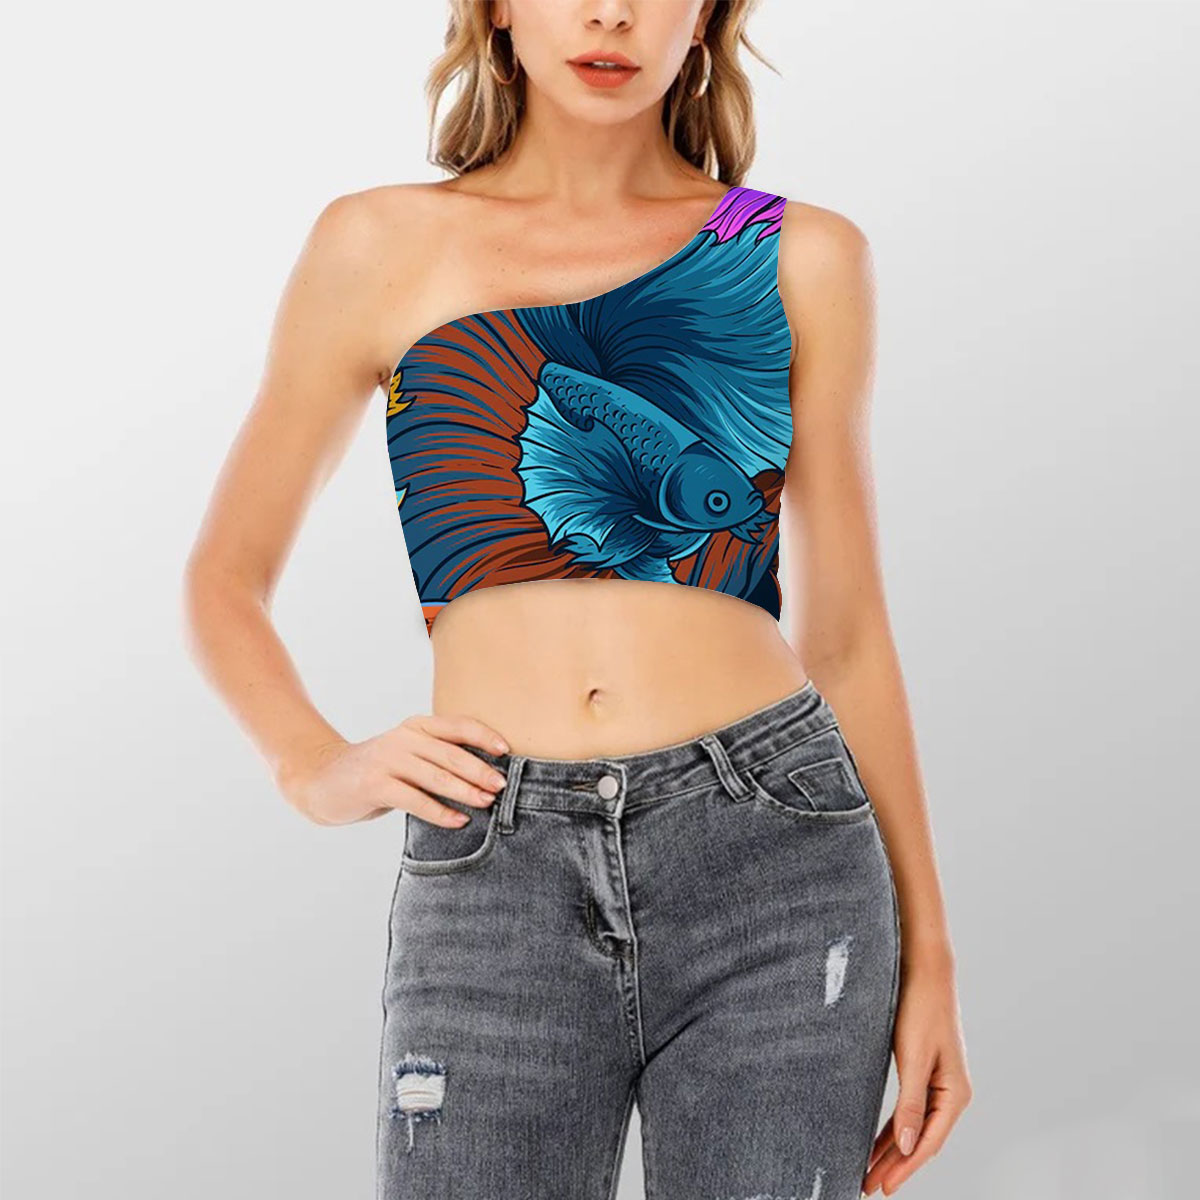 Colorful Cartoon Betta Fish Shoulder Cropped Top